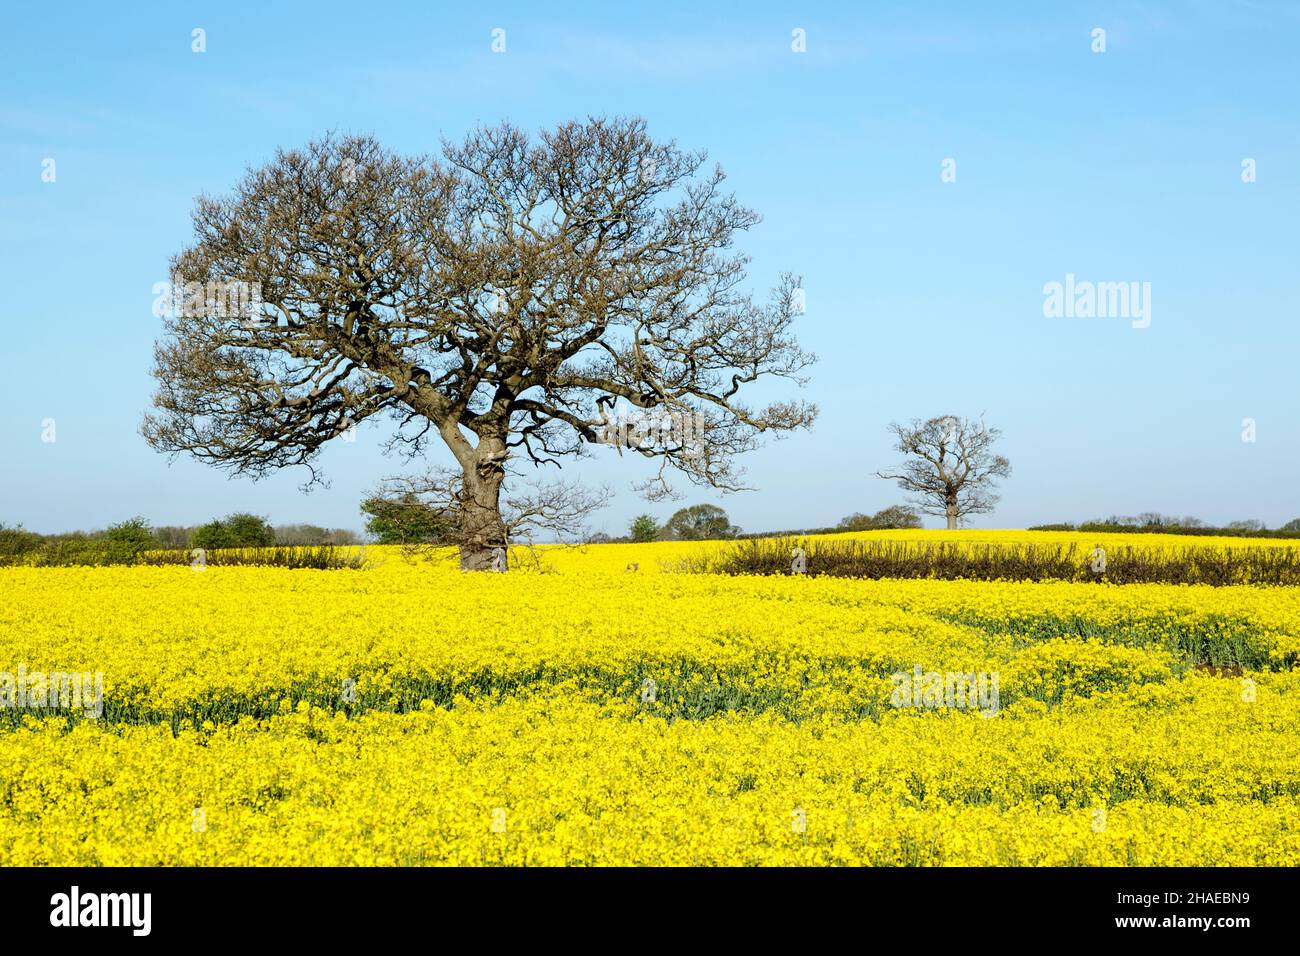 Spring season flowering rapeseed, Brassica napus, crop under blue sky showing fields, hedges and trees, also known as rape and oilseed rape Stock Photo